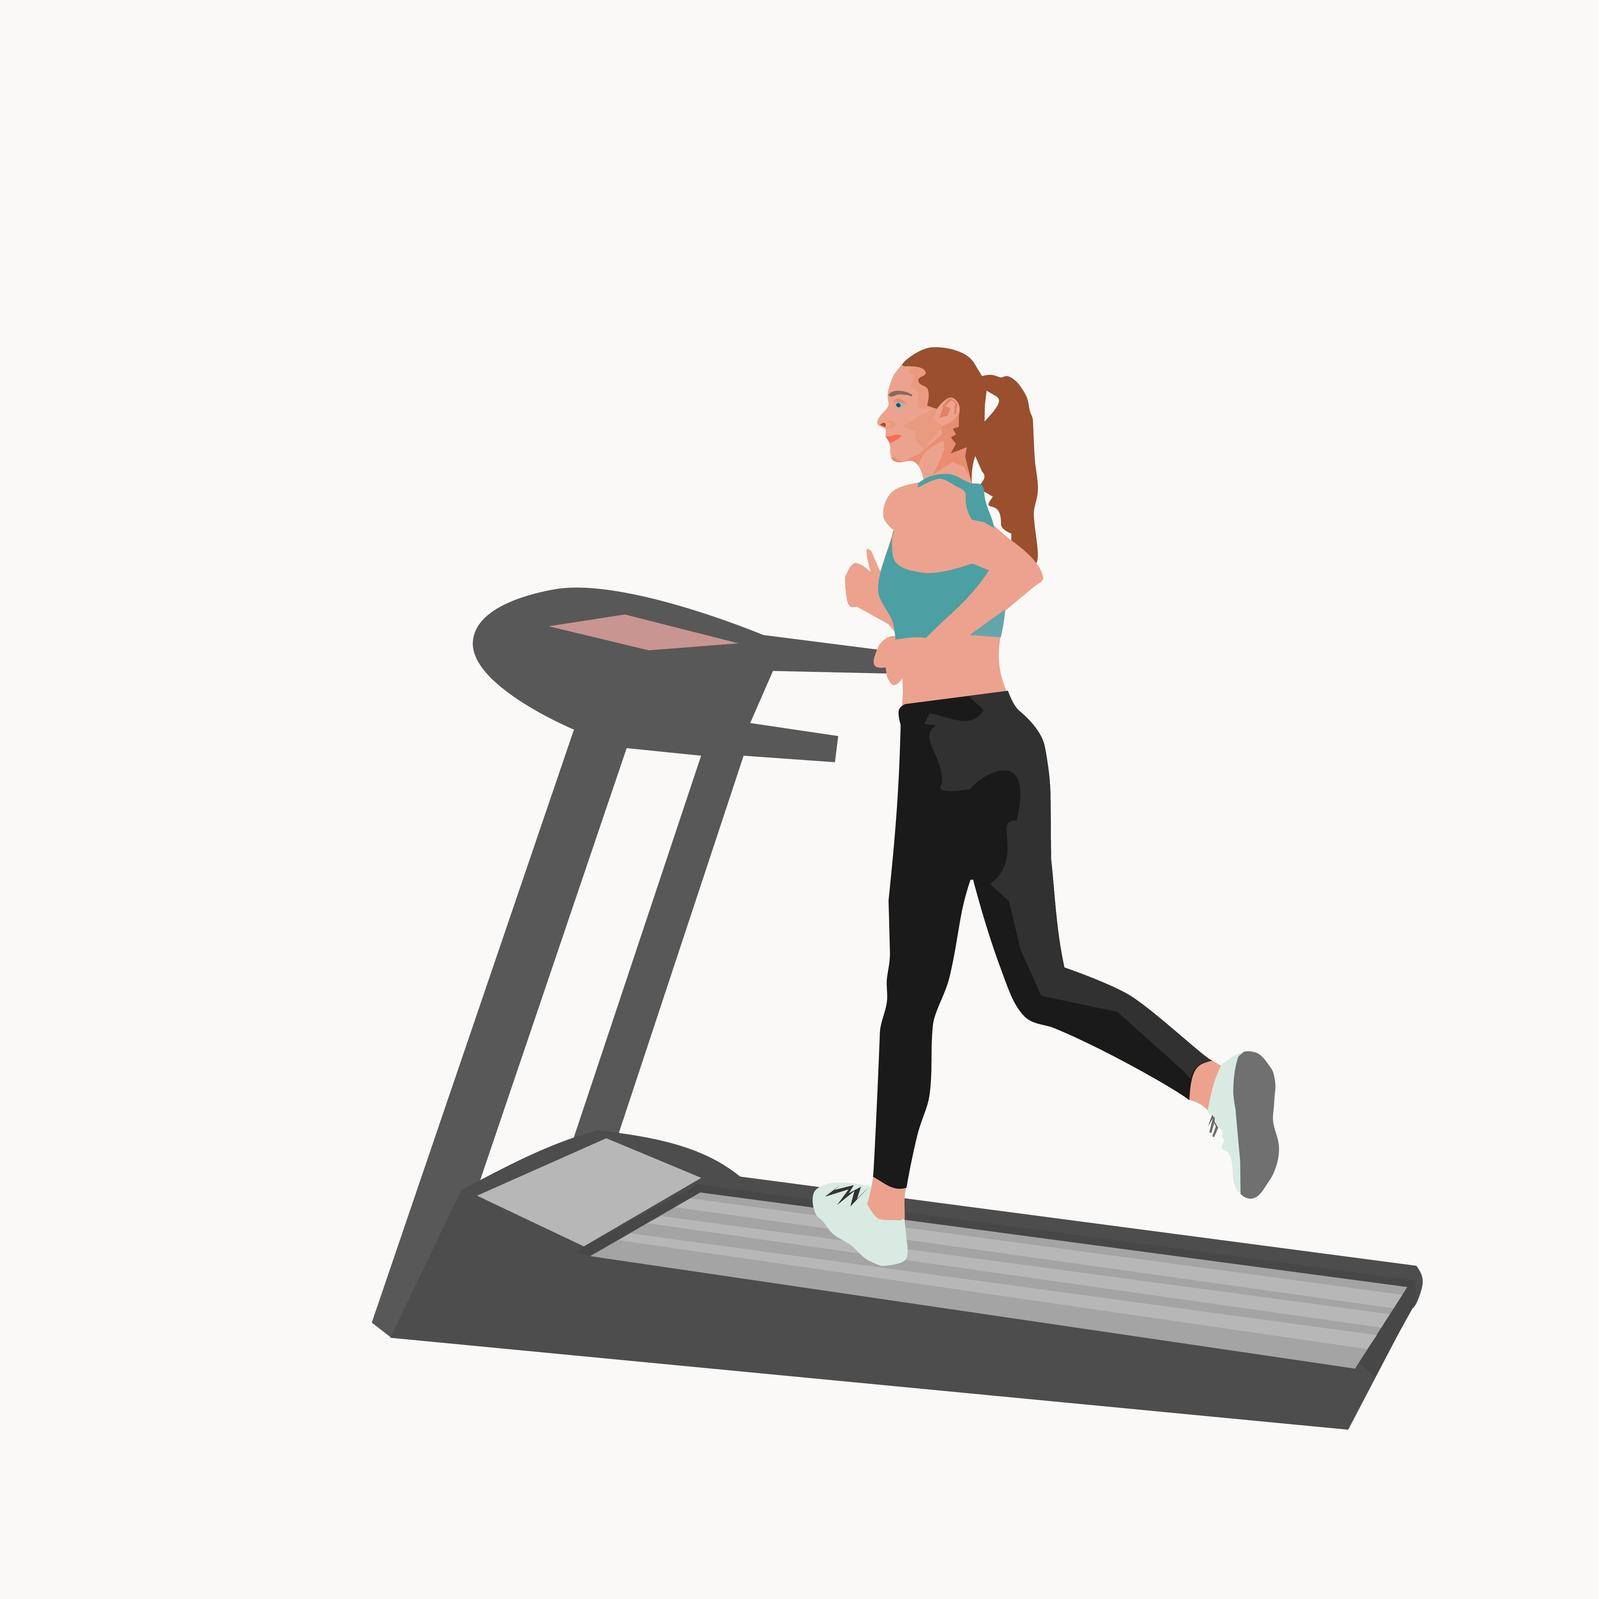 woman jogging on treadmill with white background by moo12